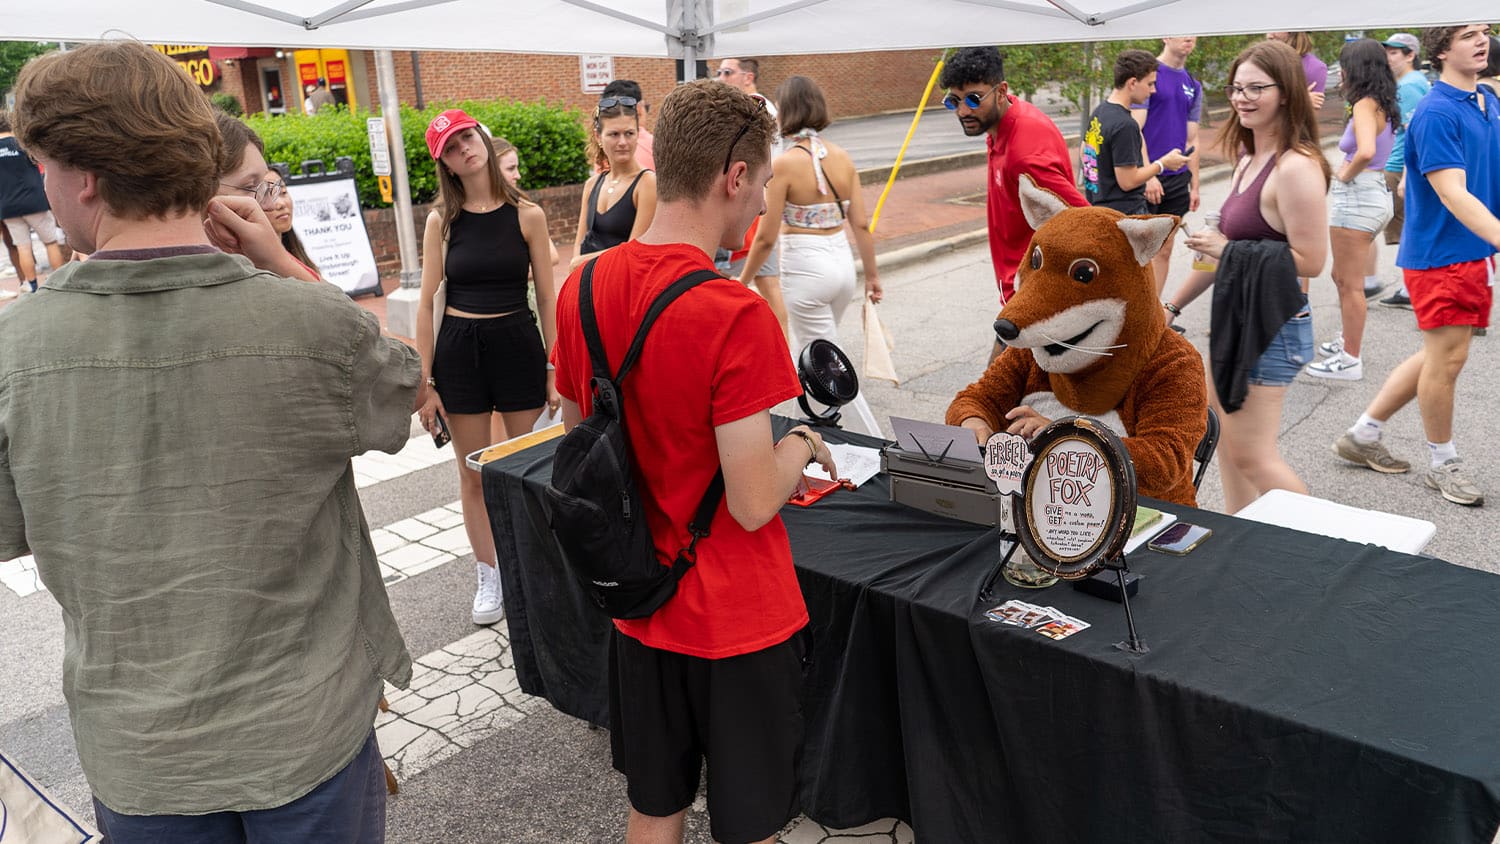 Chris Vitiello (the Poetry Fox) sits at a table under a tent and types poems for students during Packapalooza.